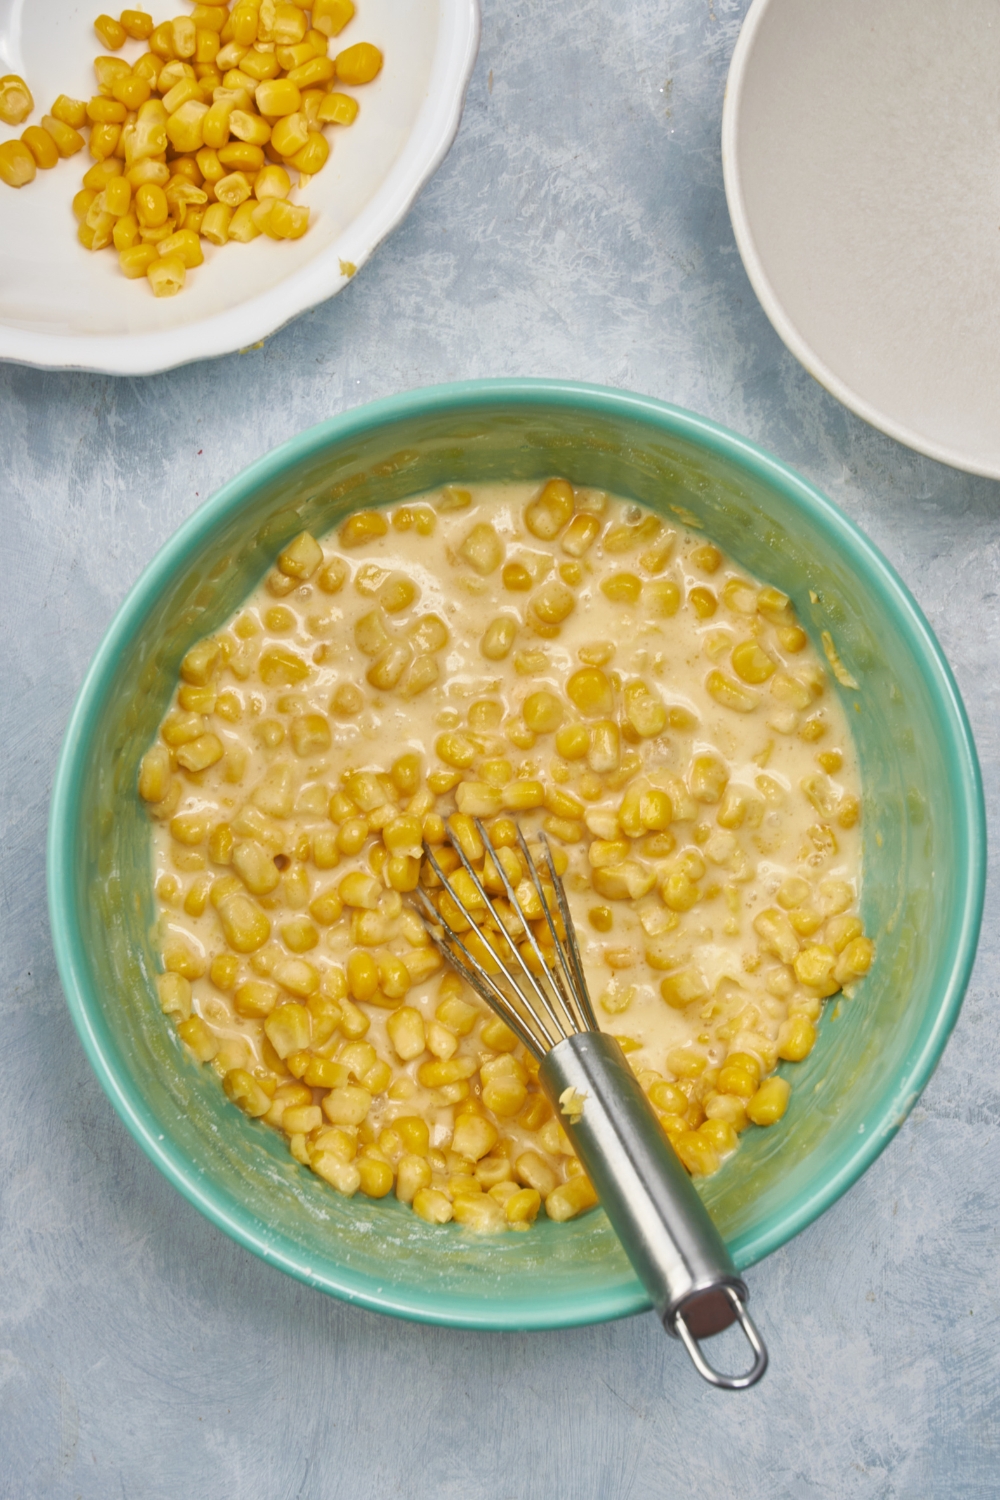 A blue bowl filled with wet ingredients and whole corn kernels added but not fully mixed together. There is a whisk in the bowl.